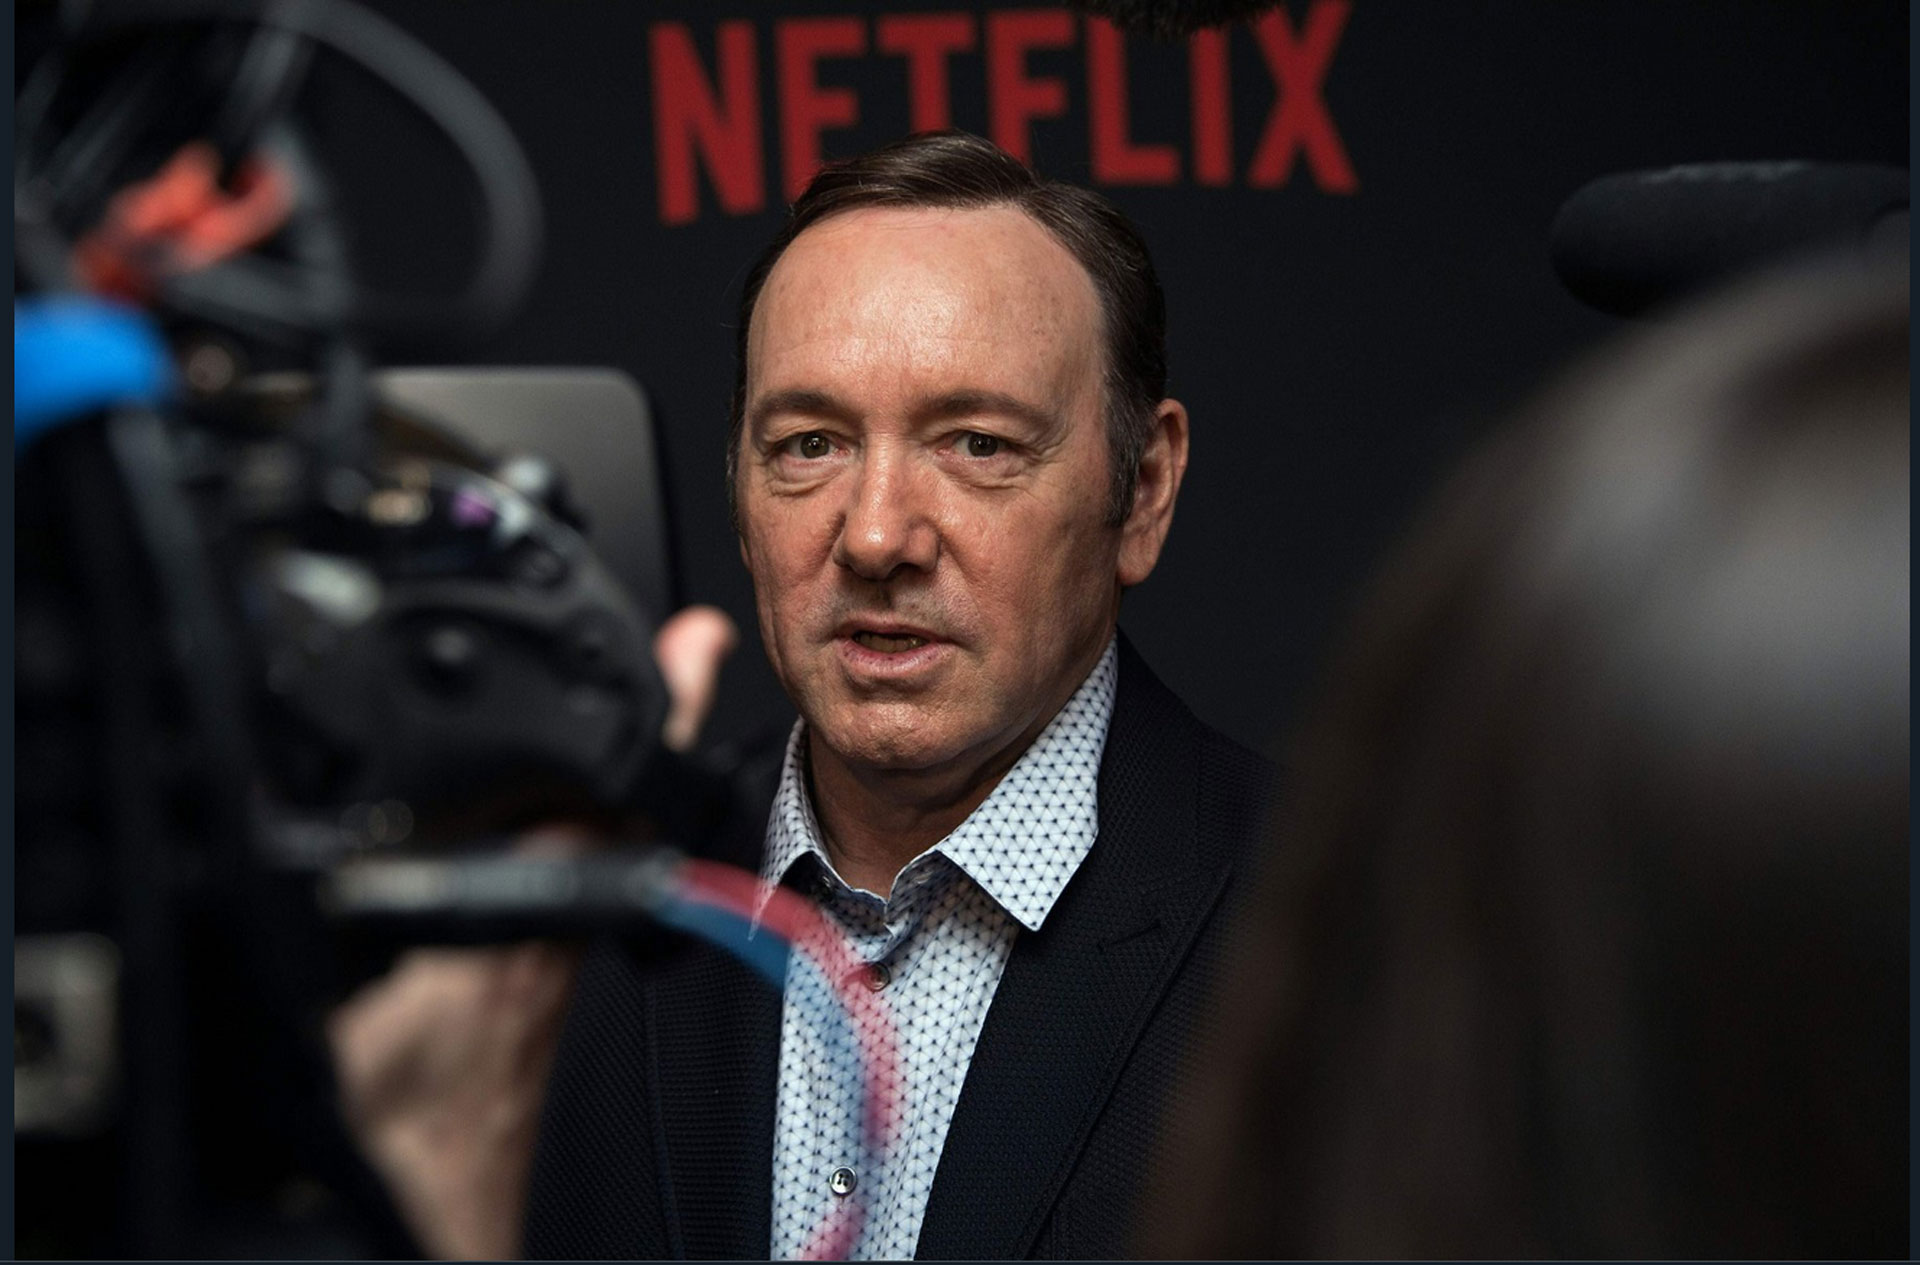 Kevin Spacey paid $31 million to produce House of Cards, a program he was dropped from in 2017 